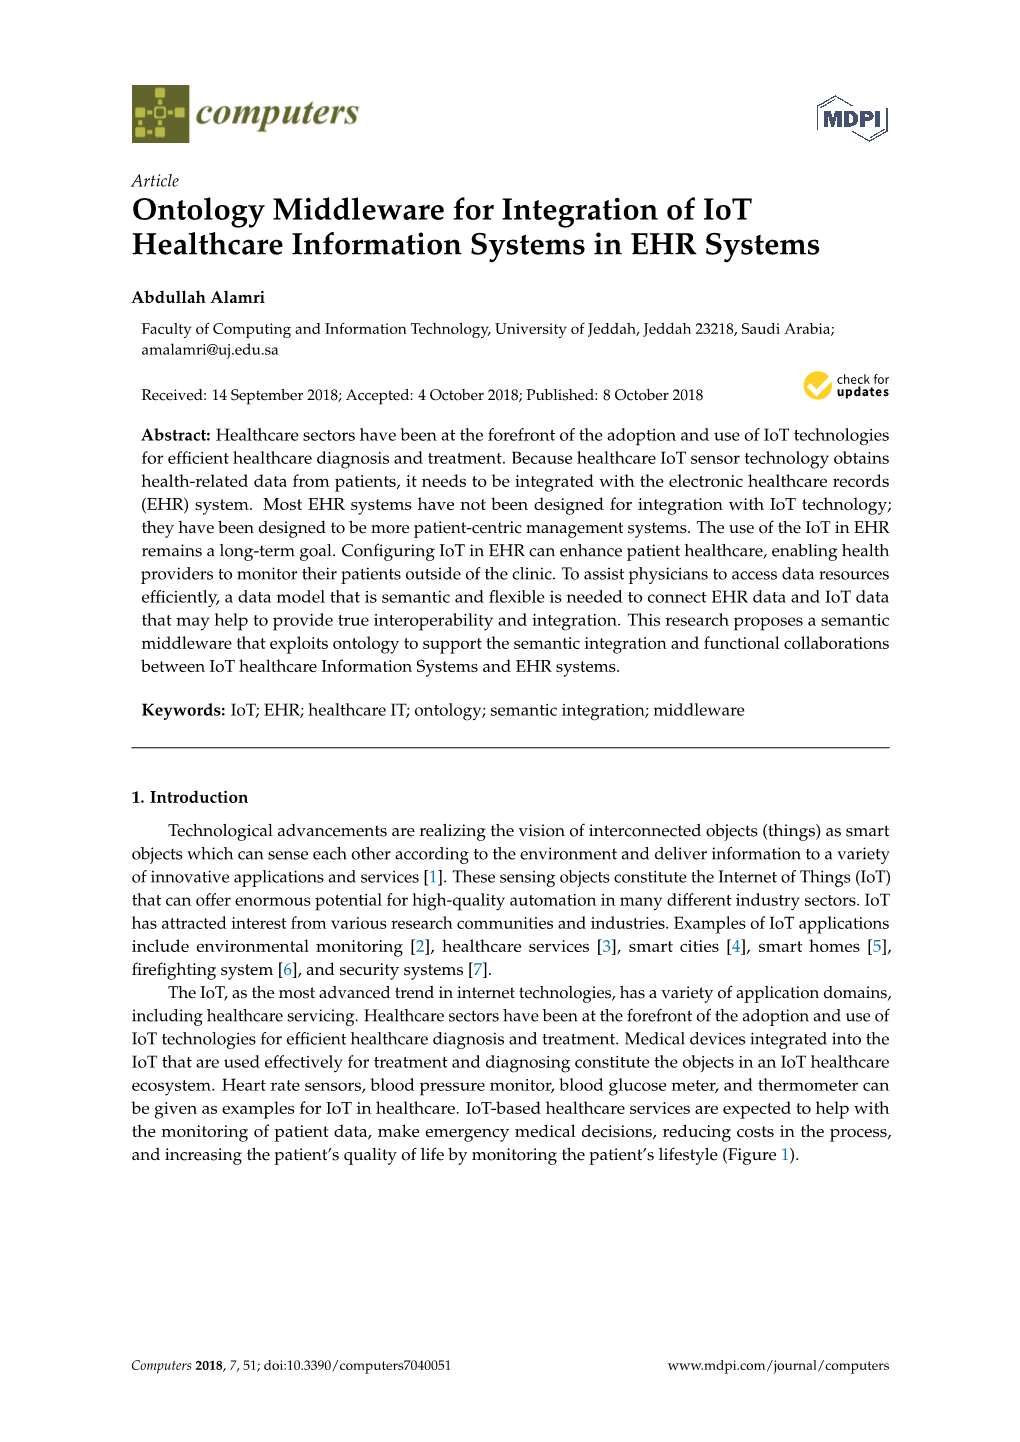 Ontology Middleware for Integration of Iot Healthcare Information Systems in EHR Systems